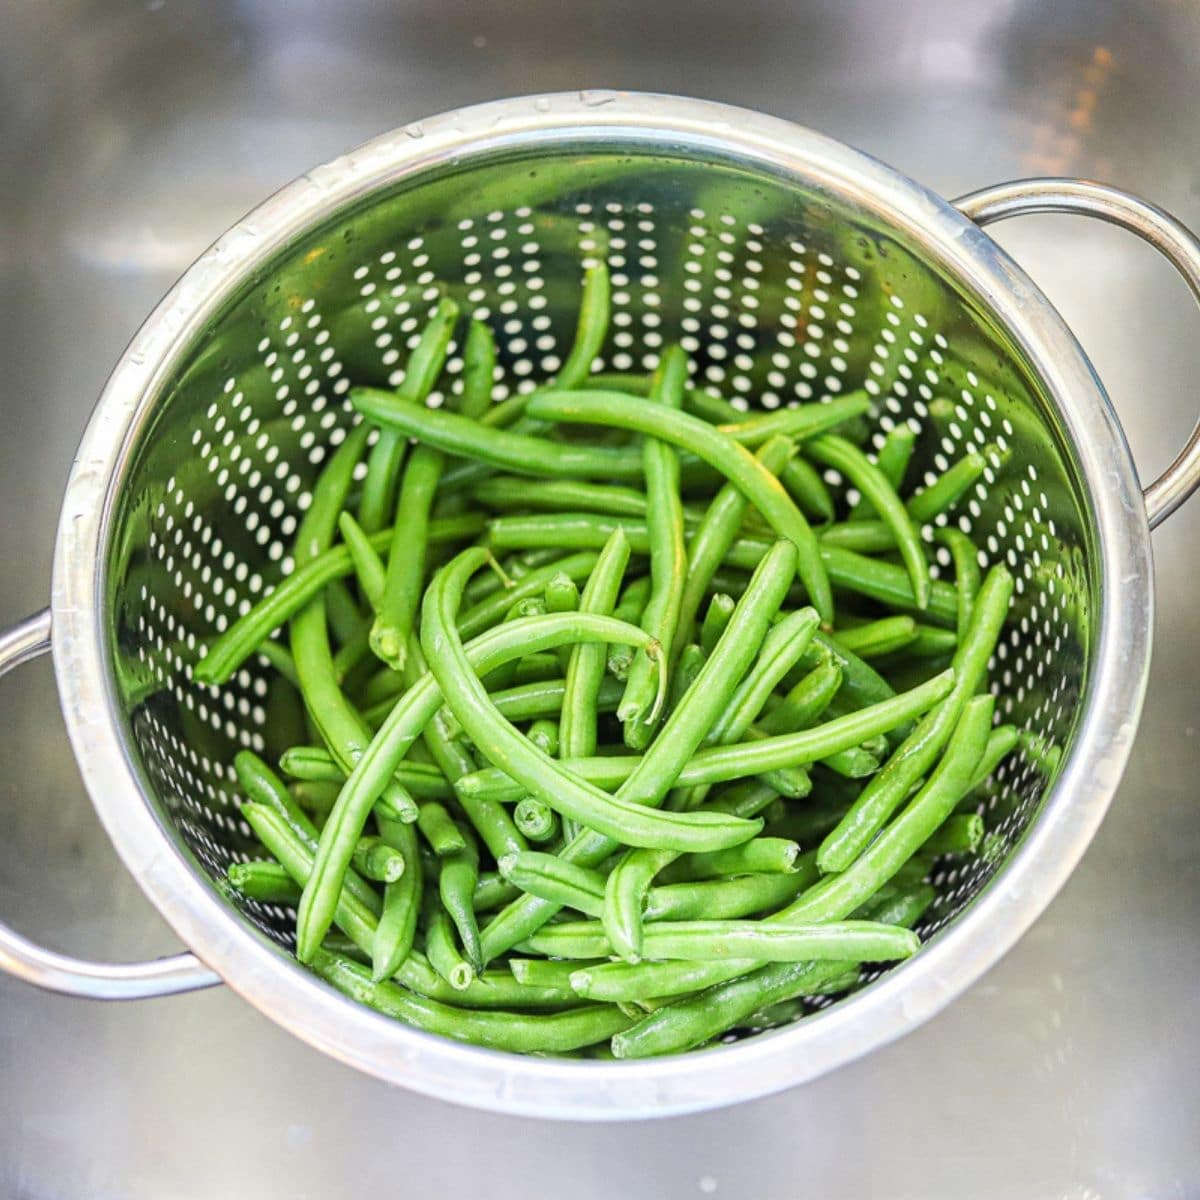 Fresh green beans in a silver colander in a sink.